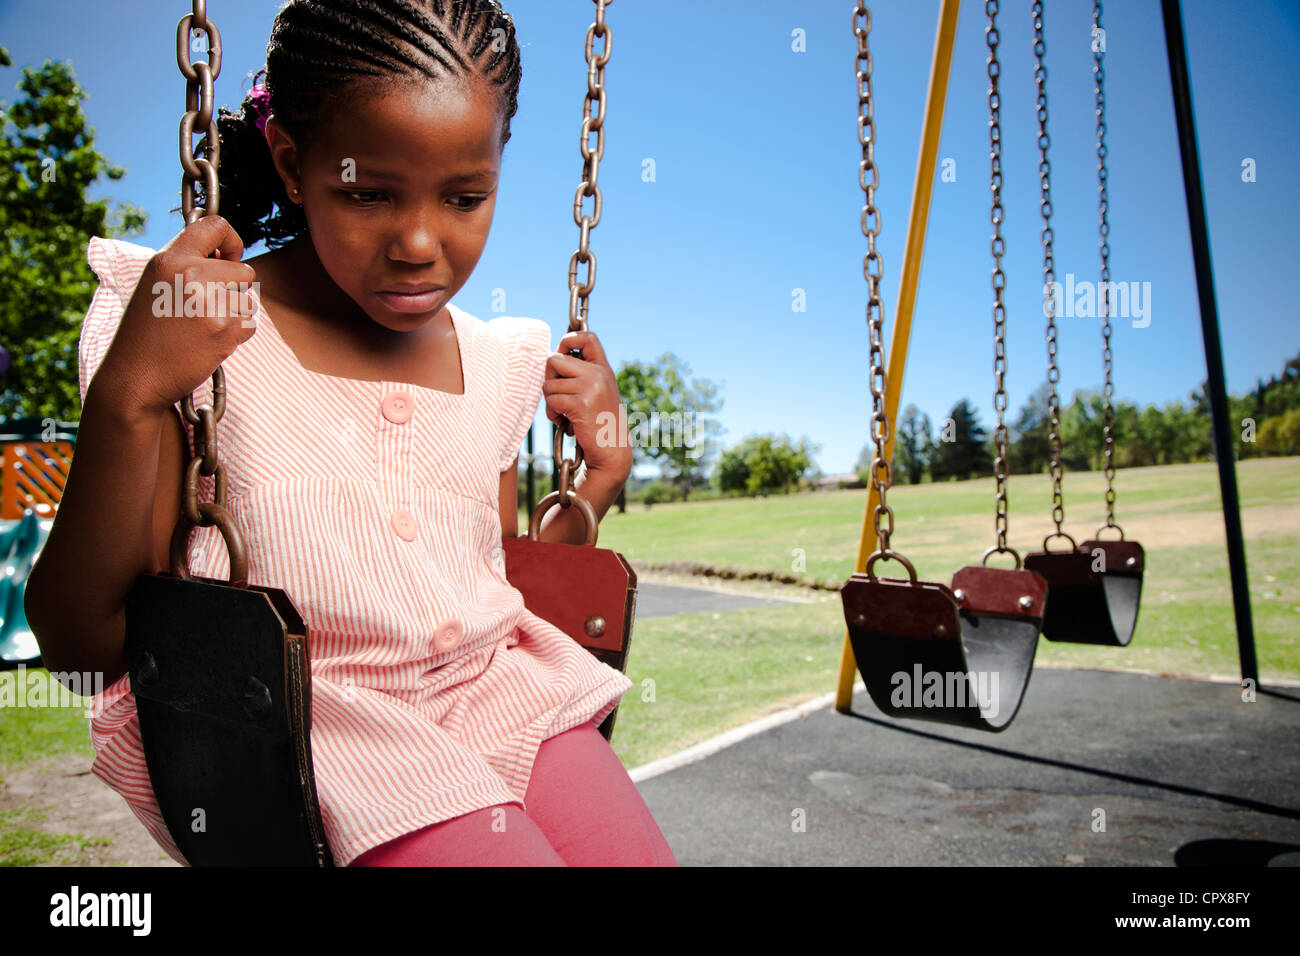 A little girl sitting on a swing looking sad Stock Photo